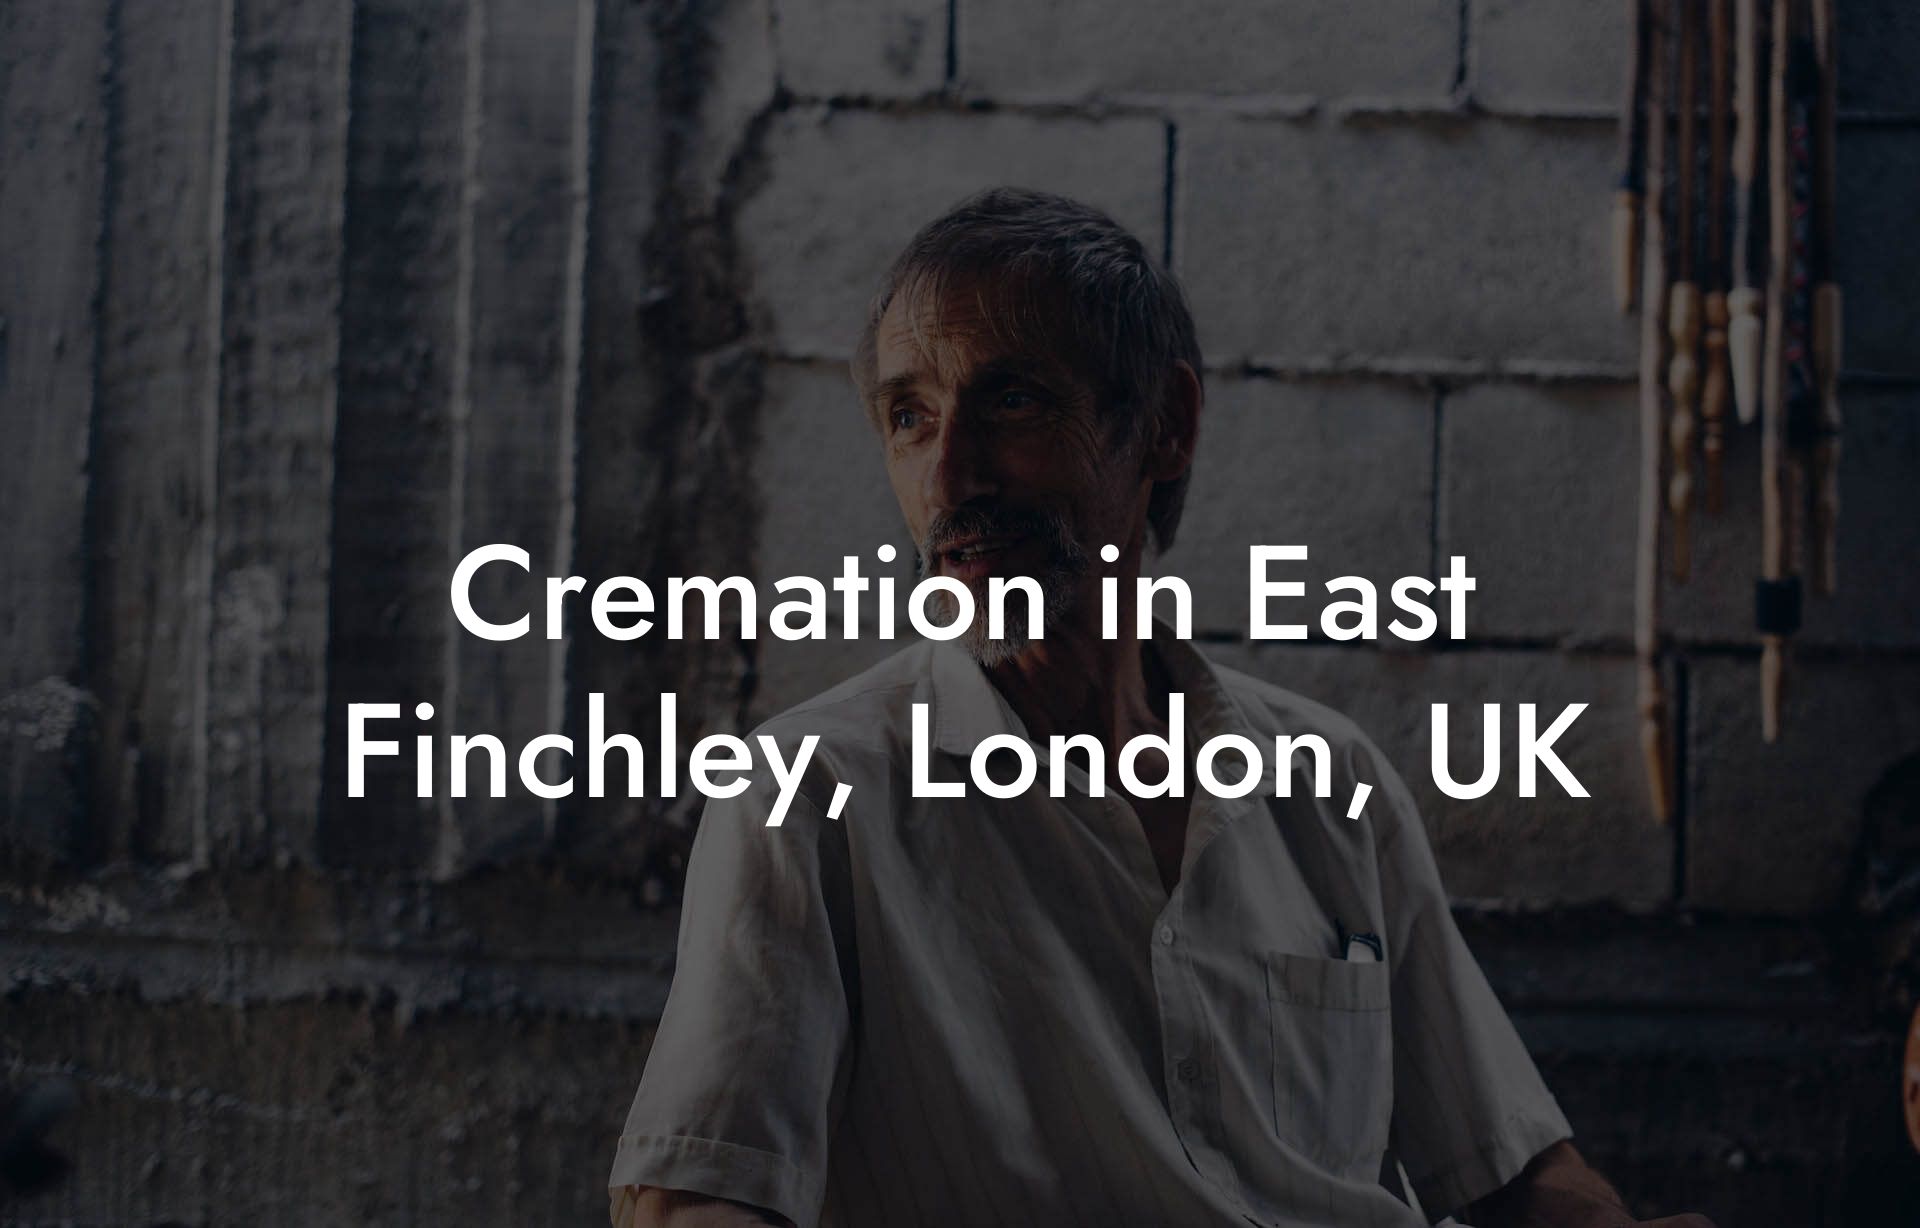 Cremation in East Finchley, London, UK